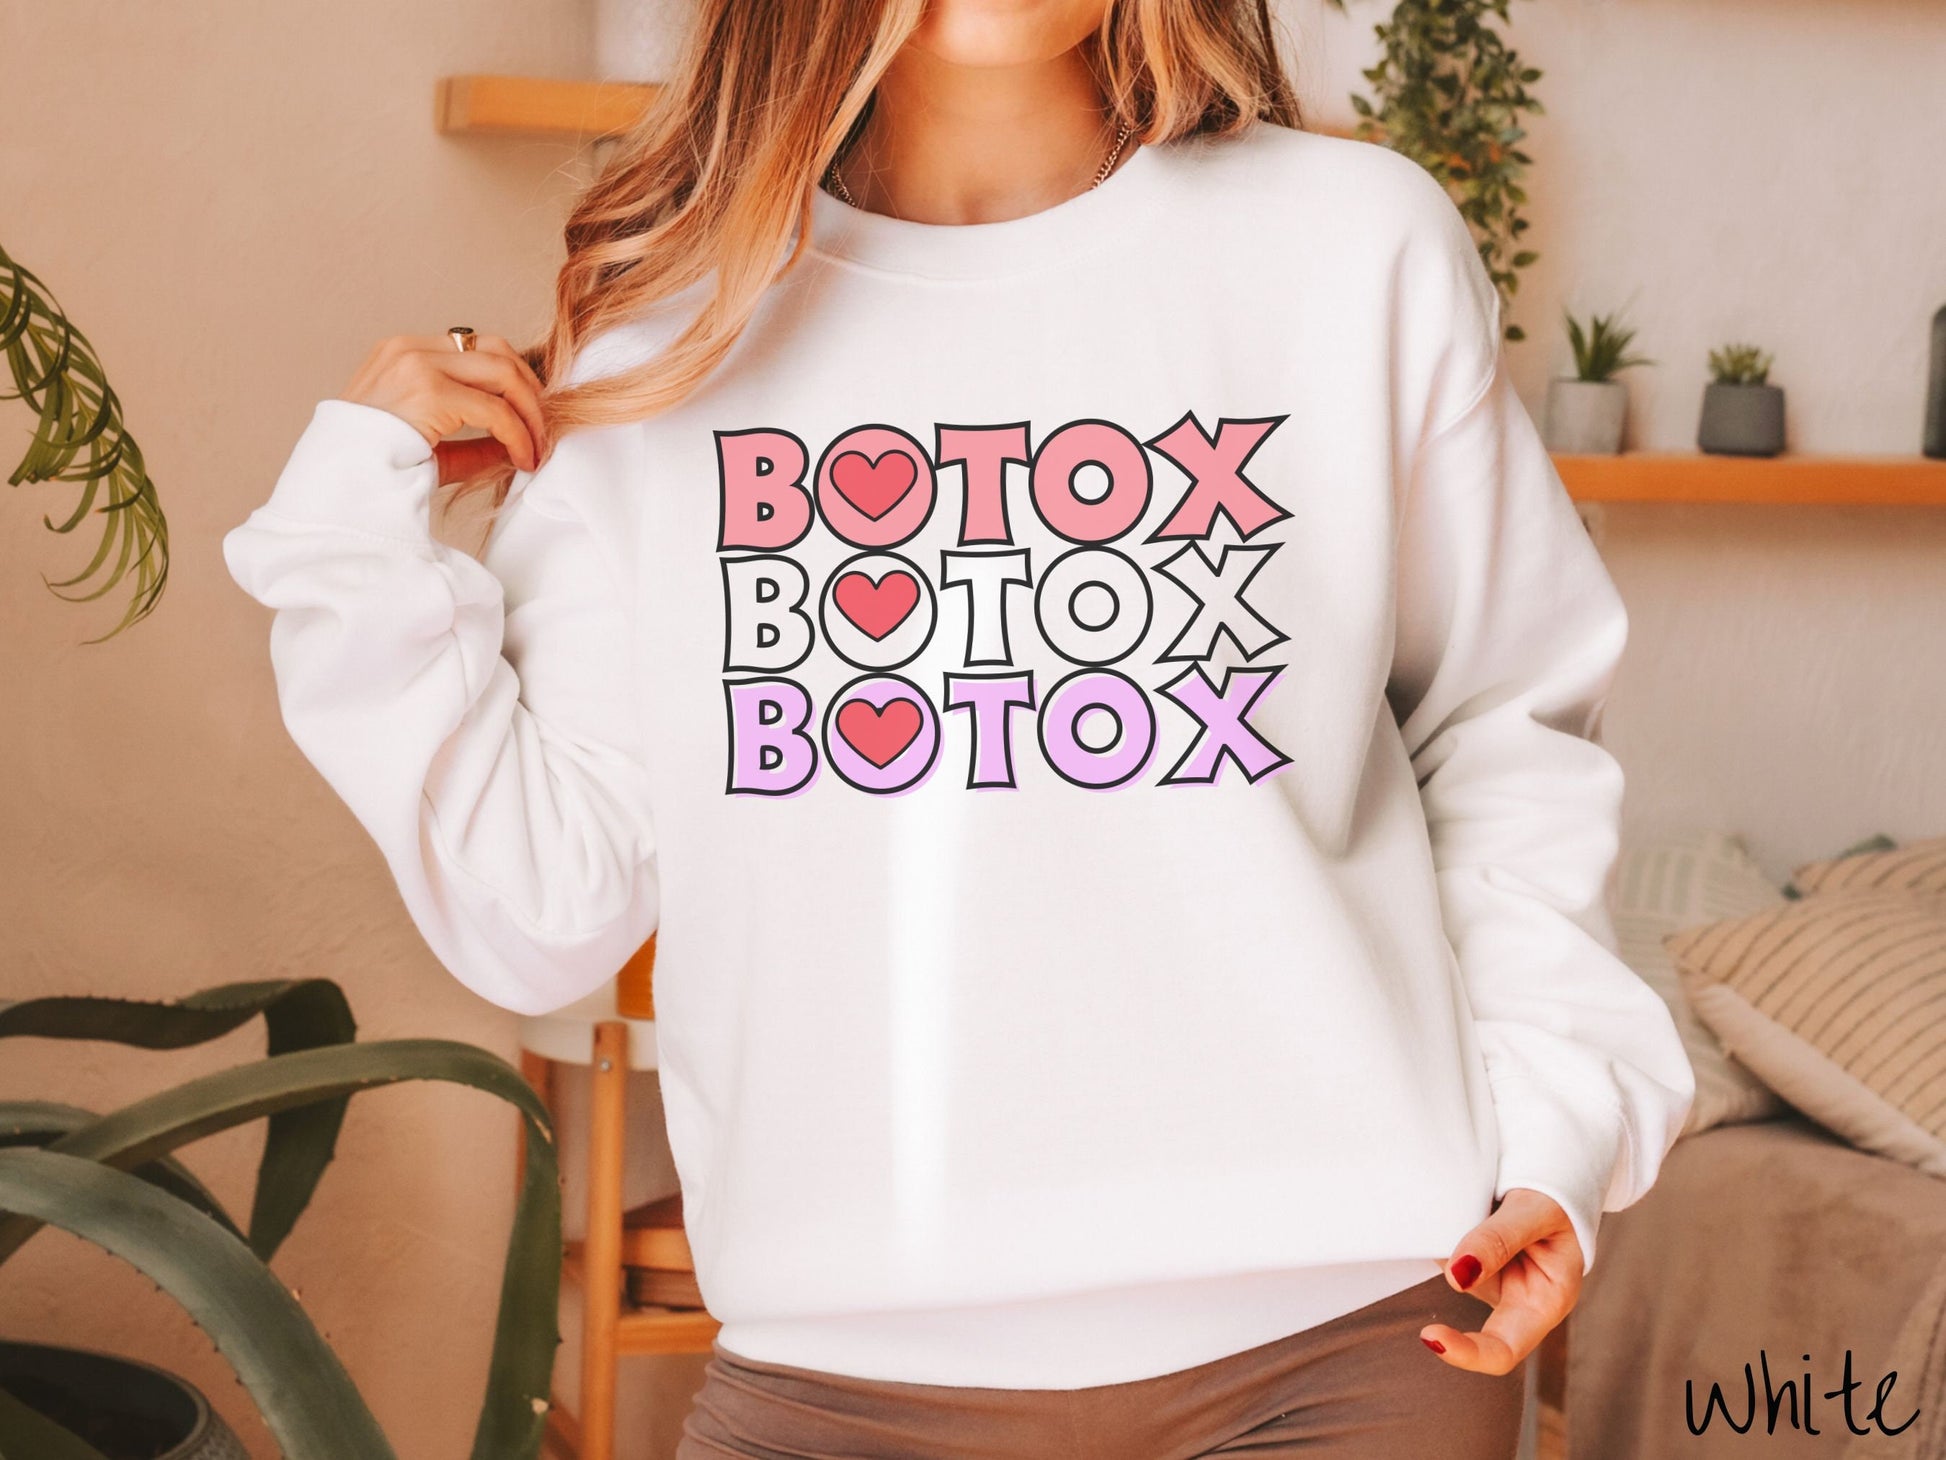 A woman wearing a cute white colored sweatshirt with the word Botox listed three times in different shades of pink and red, with red hearts inside the first letter O in Botox.